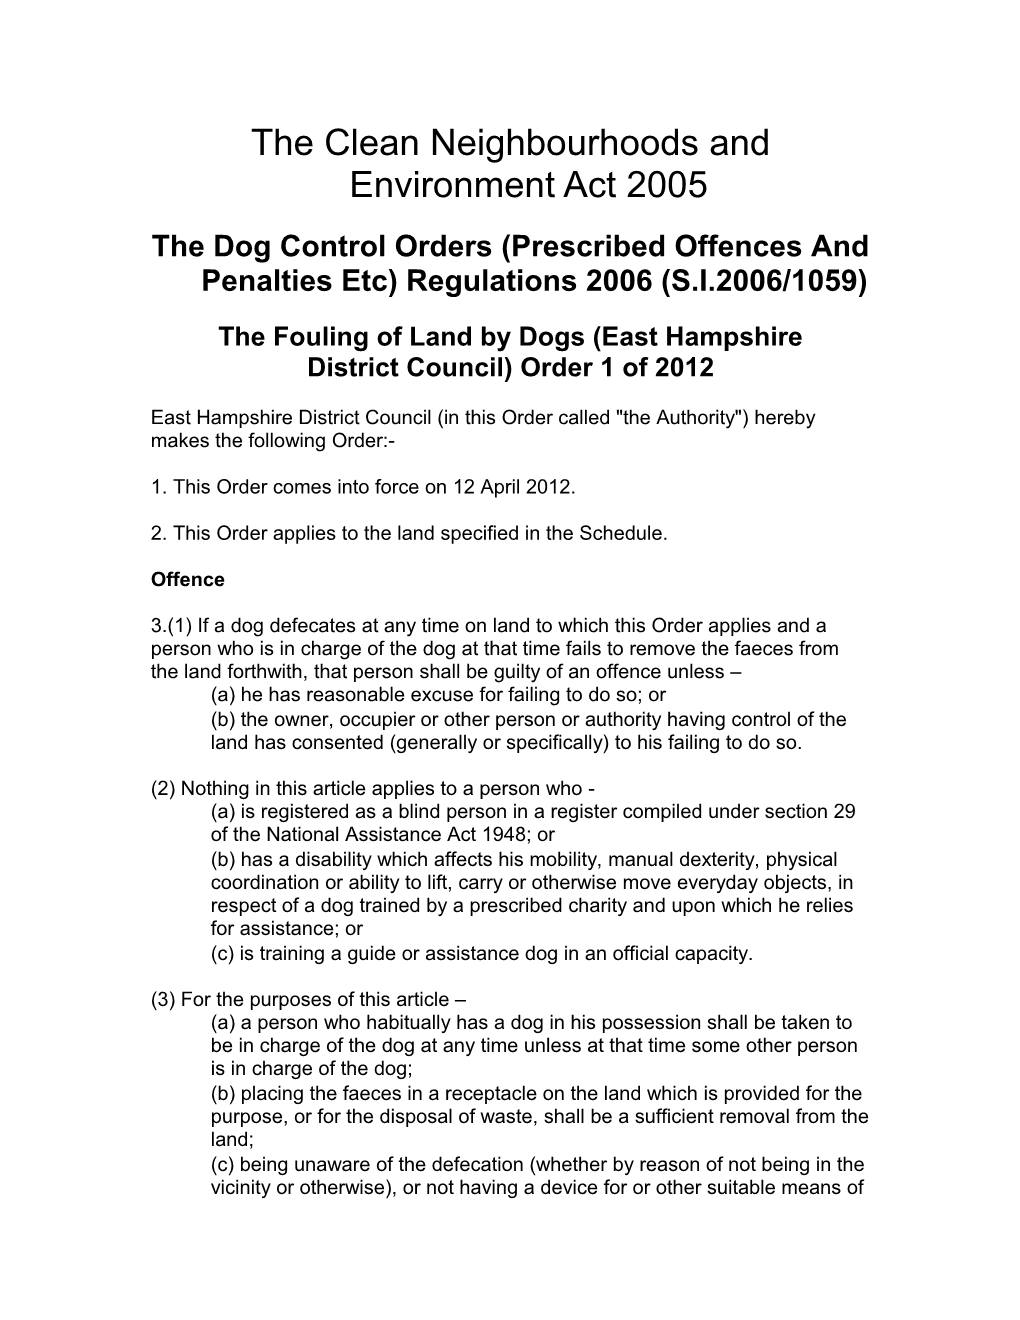 The Clean Neighbourhoods and Environment Act 2005